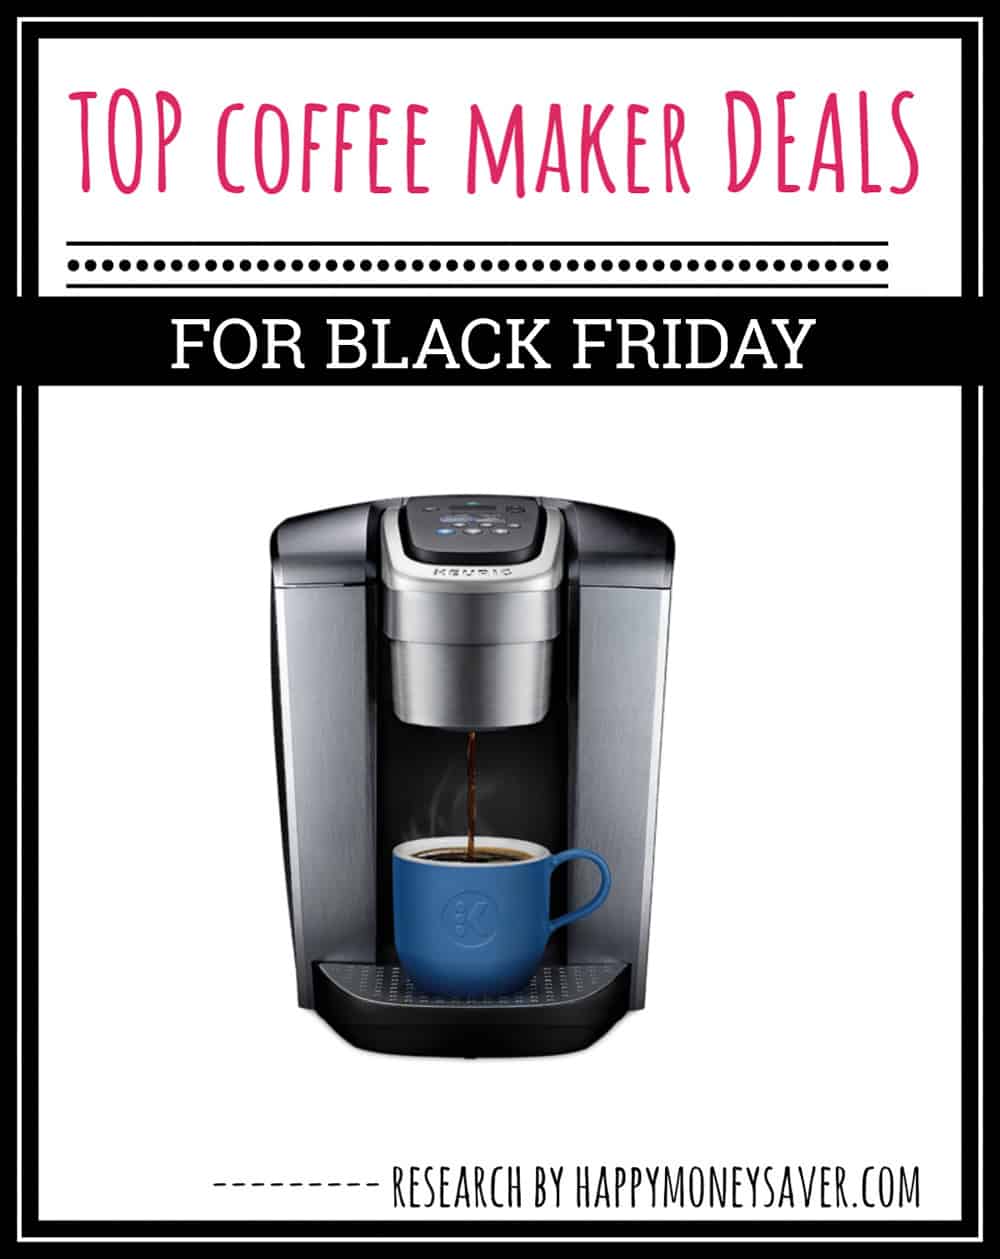 coffee maker on white background with words top coffee deals for black friday  with amazon links included and research by happymoneysaver.com